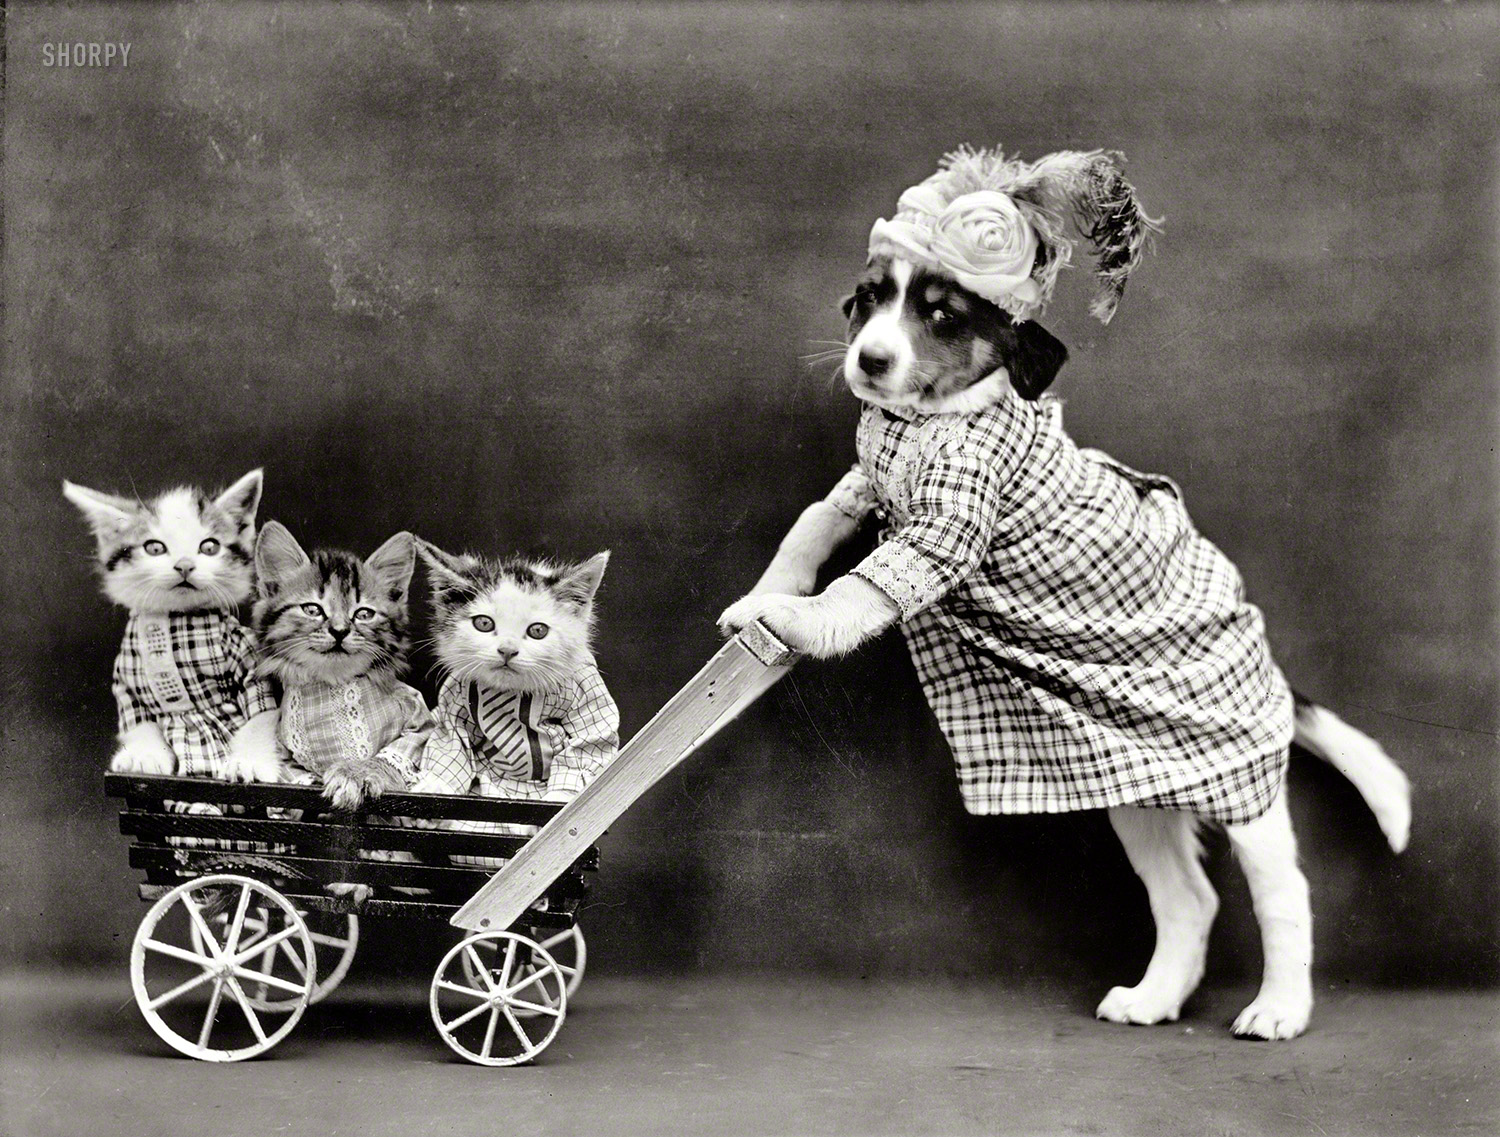 From almost 100 years ago: "Dog in costume of dress and lady's hat pushing cart with three kittens." Middle Kitten is quite the trouper, having appeared in several other pictures in this series by Harry W. Frees. View full size.